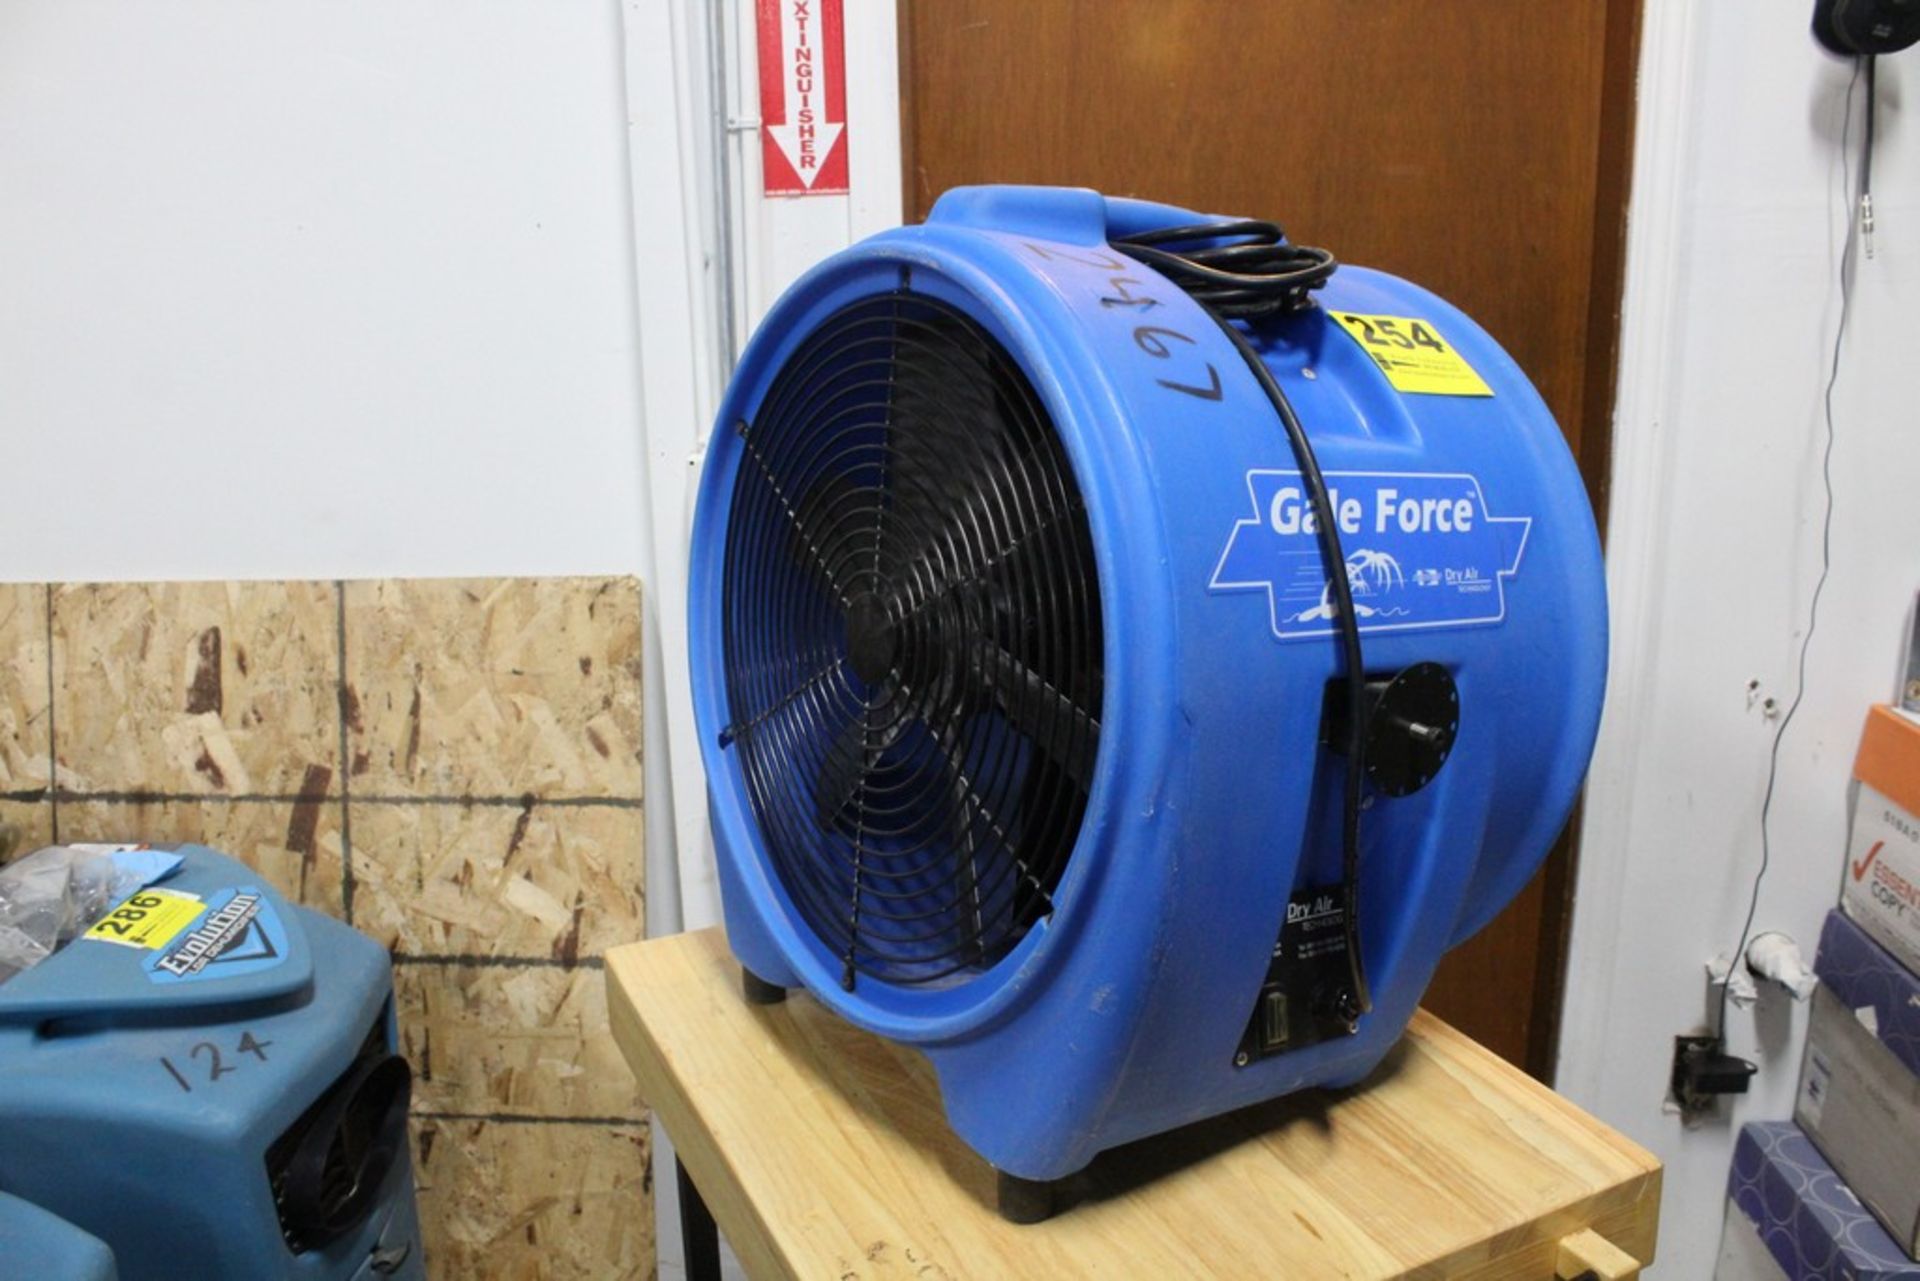 DRY AIR TECHNOLOGY GALE FORCE AIR MOVER